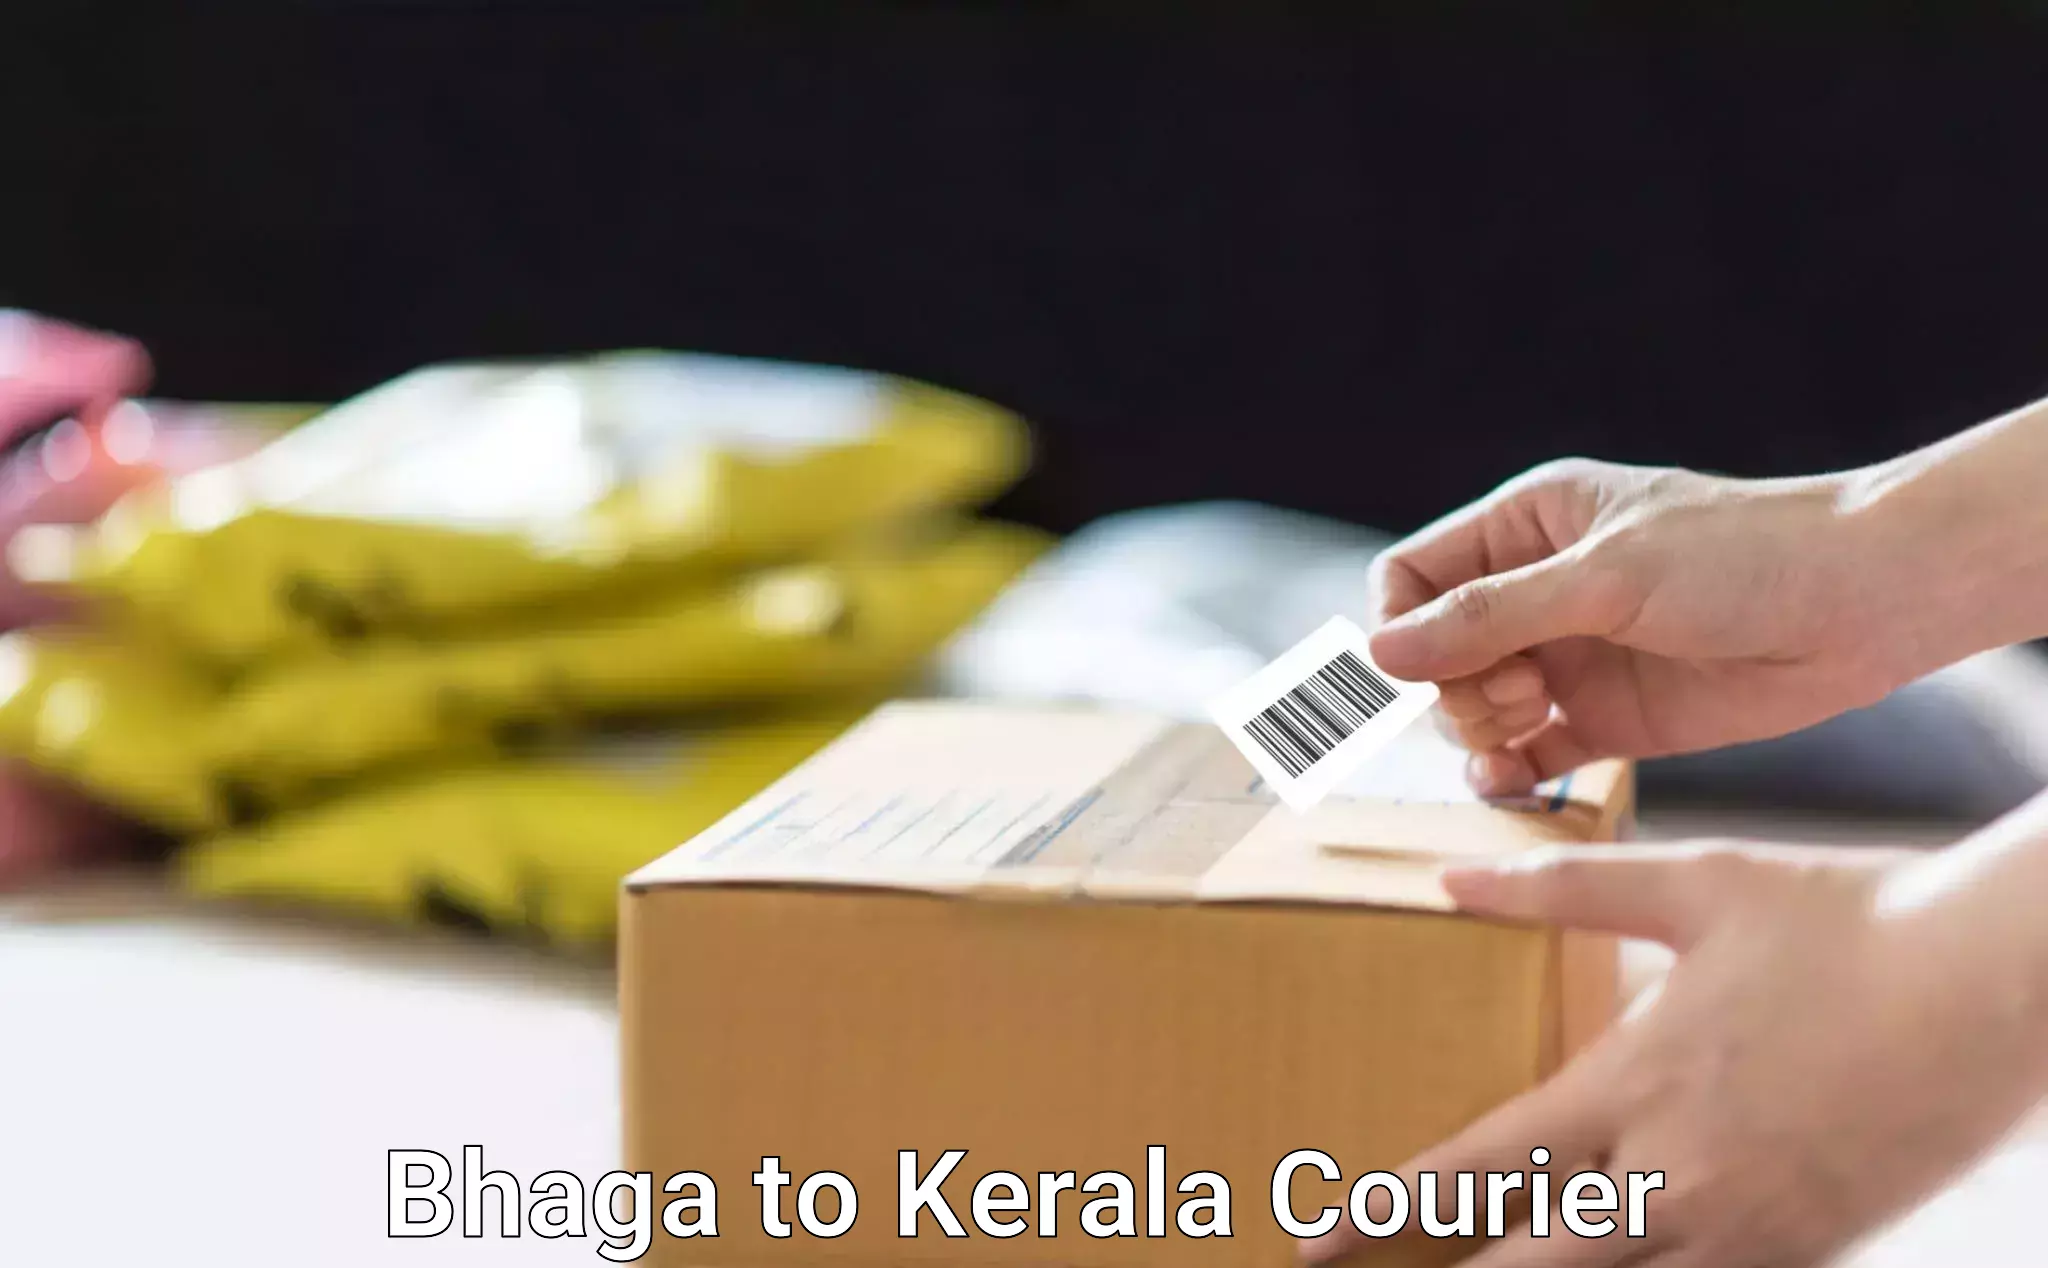 Nationwide delivery network Bhaga to Kozhikode